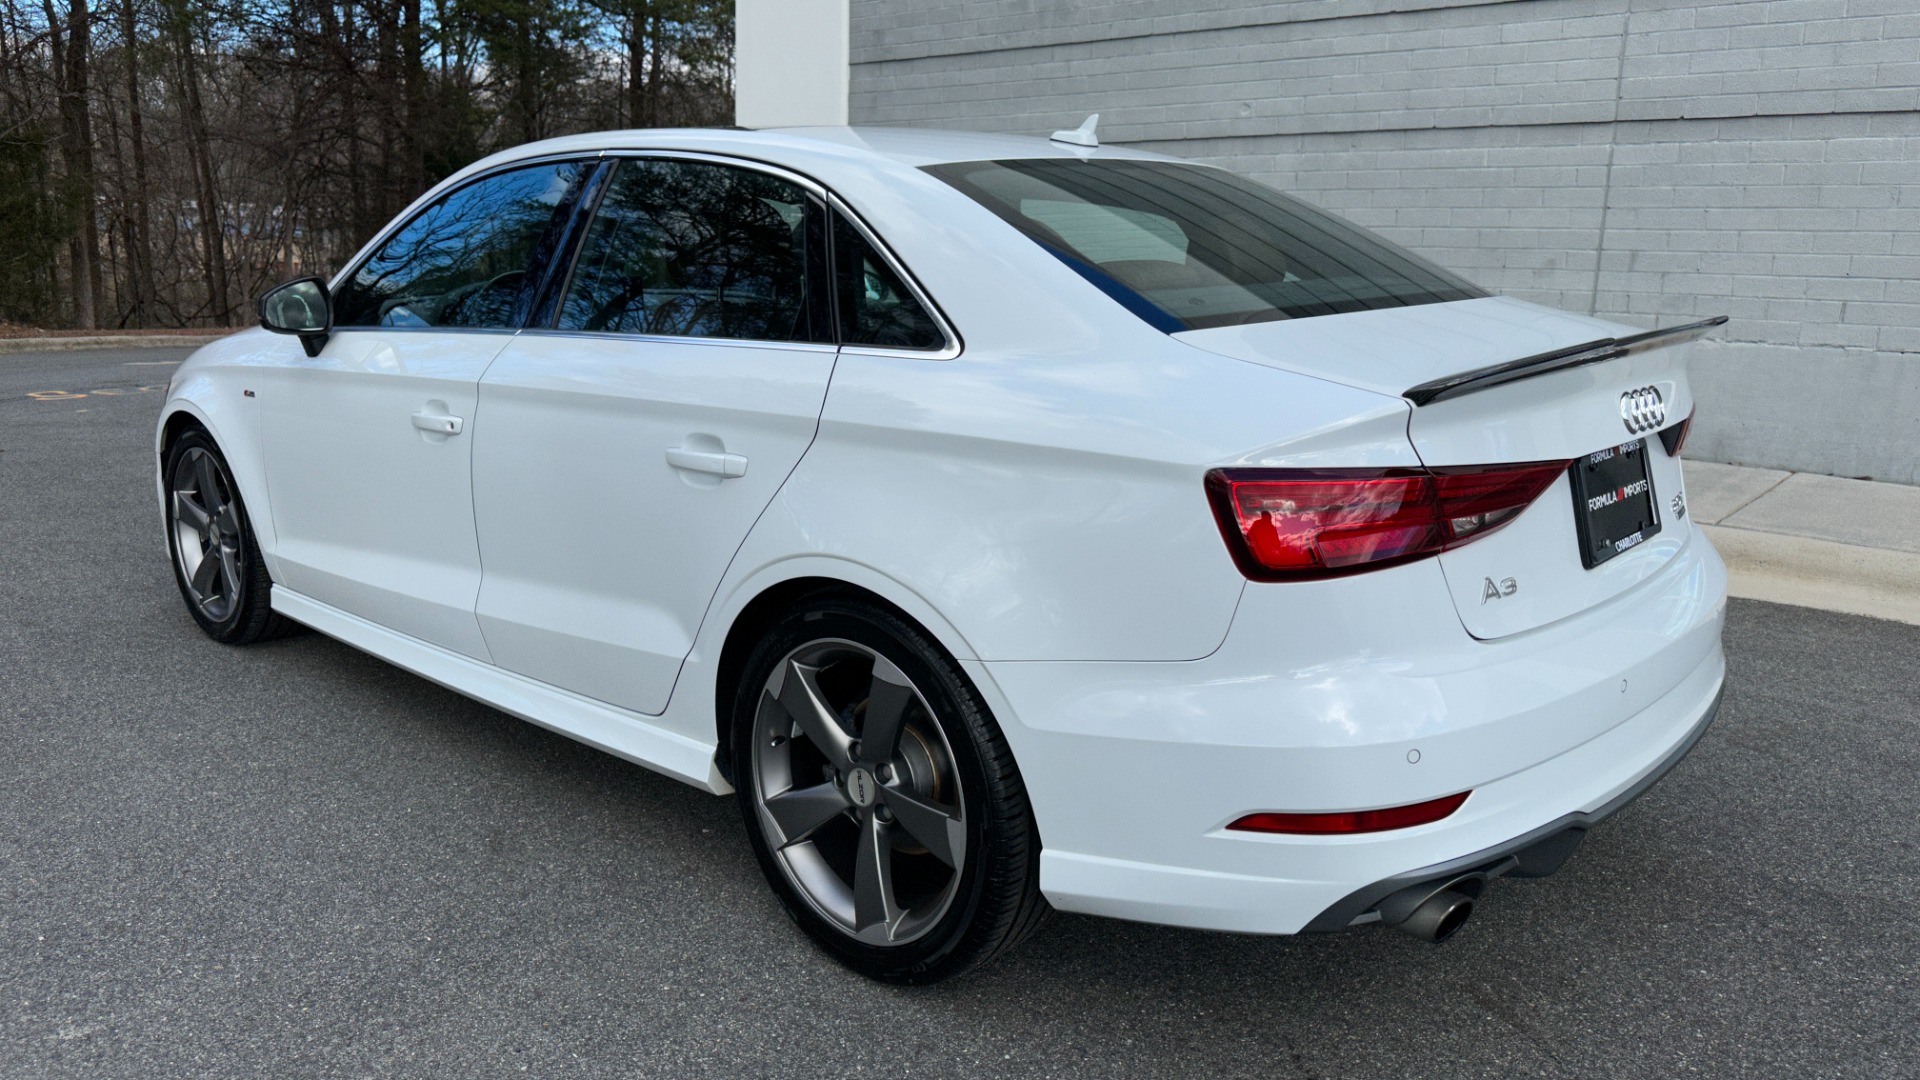 Used 2017 Audi A3 Sedan PREMIUM PLUS / SPORT PACKAGE / LIGHT PACKAGE / SPORT SUSPENSION / B&O SOUND for sale $21,995 at Formula Imports in Charlotte NC 28227 4